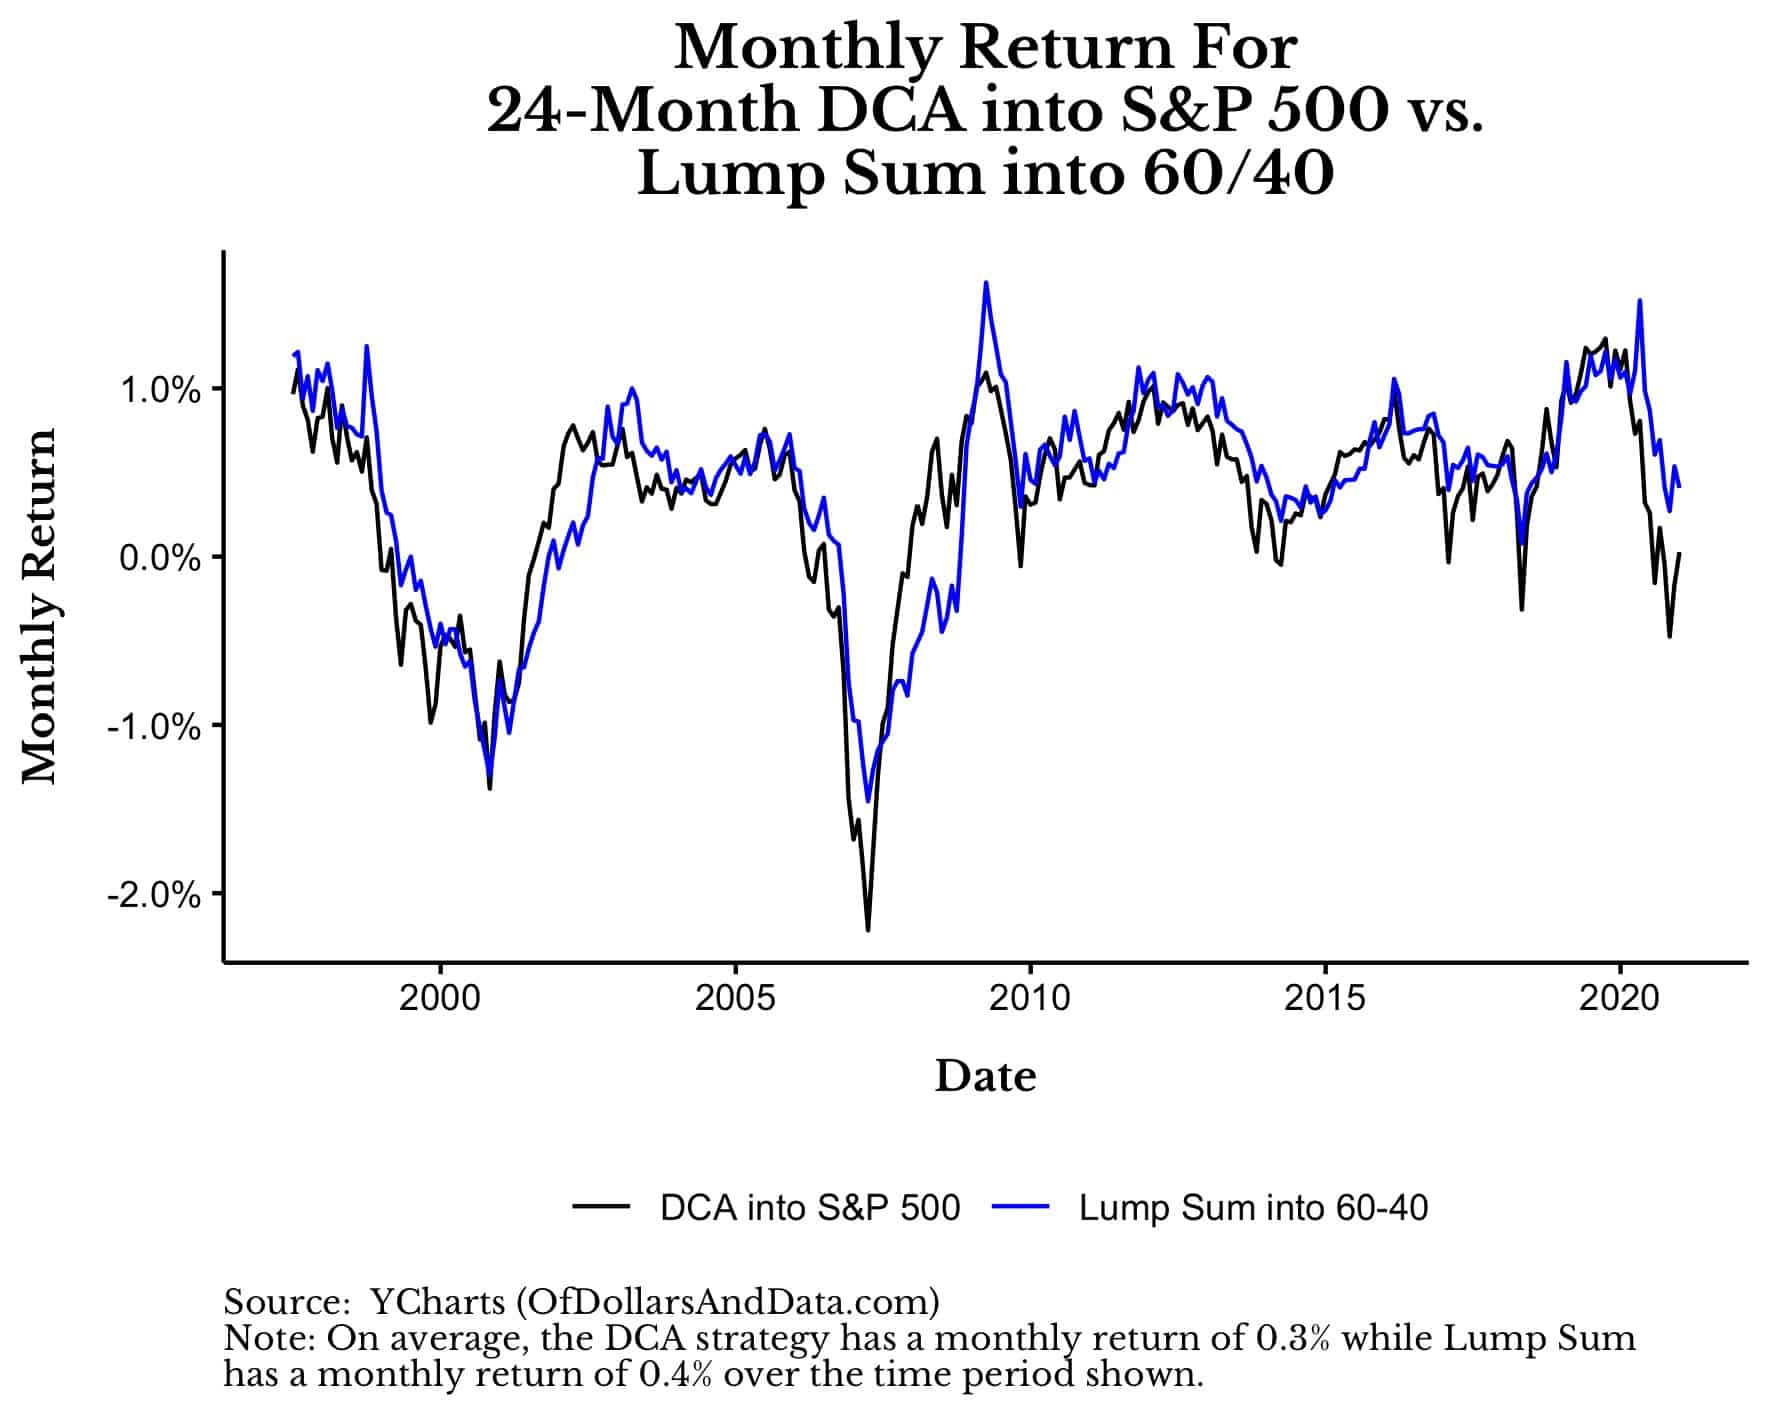 Monthly return of DCA vs. Lump Sum performance into a 60/40 portfolio from the late 1990s to 2022.